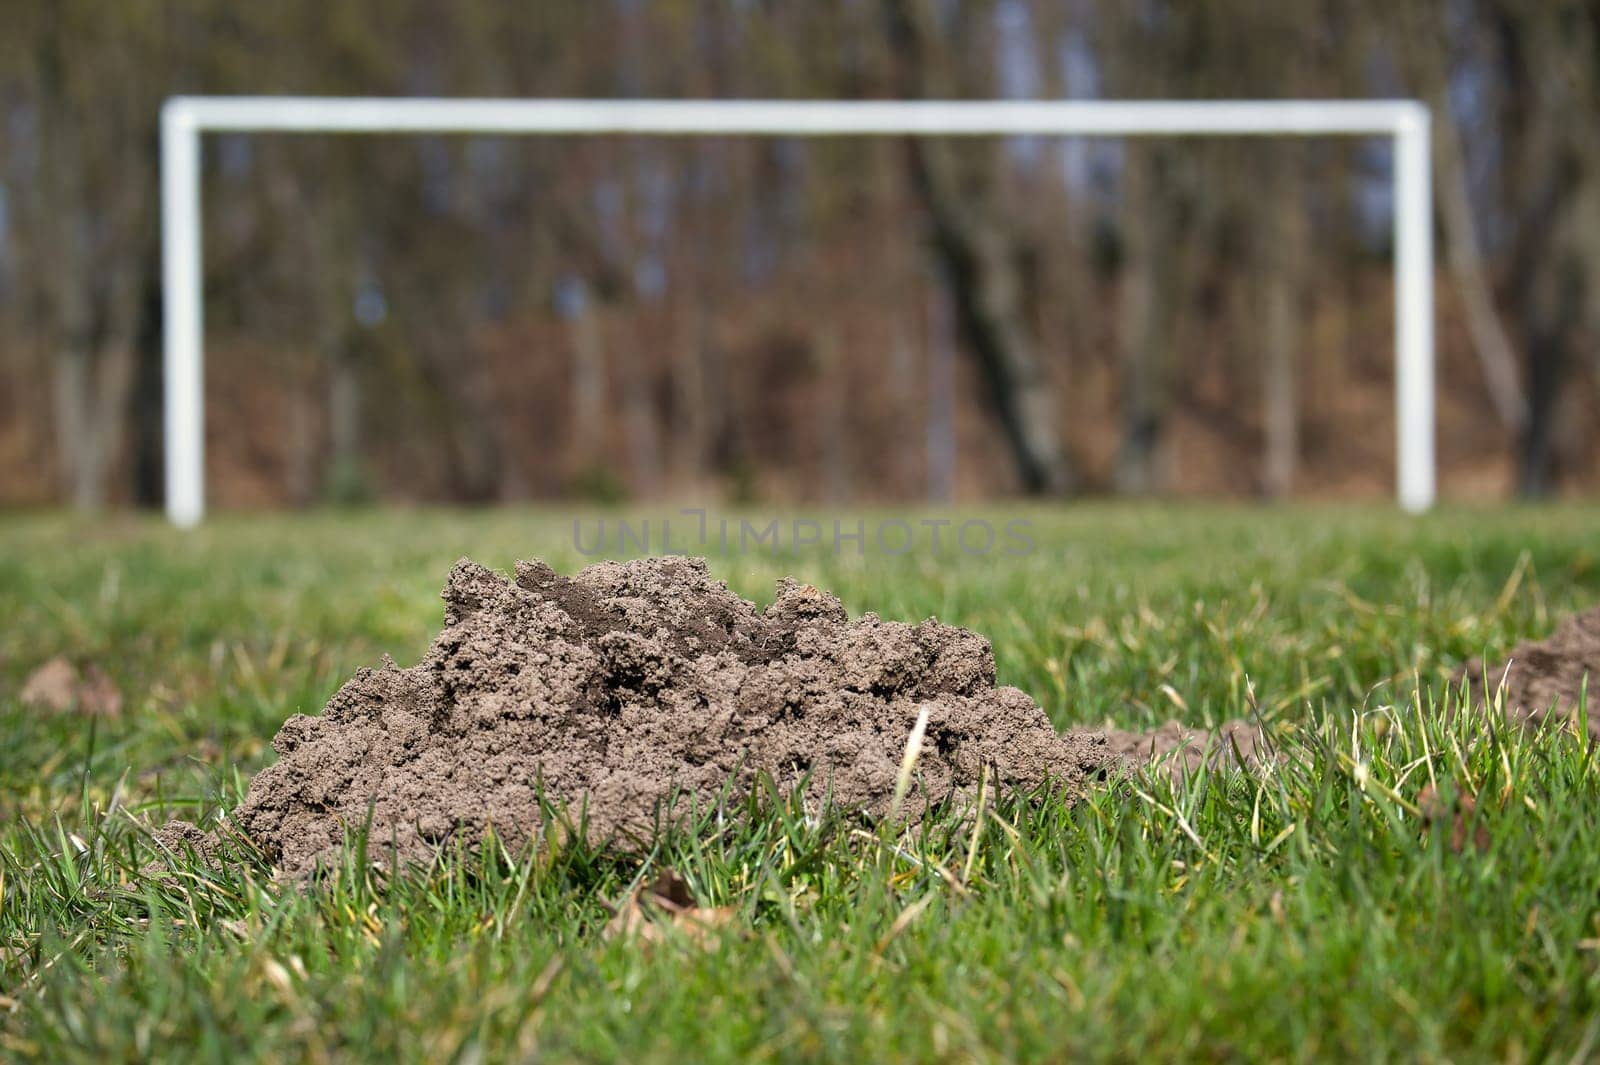 Football pitch with large mole hole in foreground by NetPix